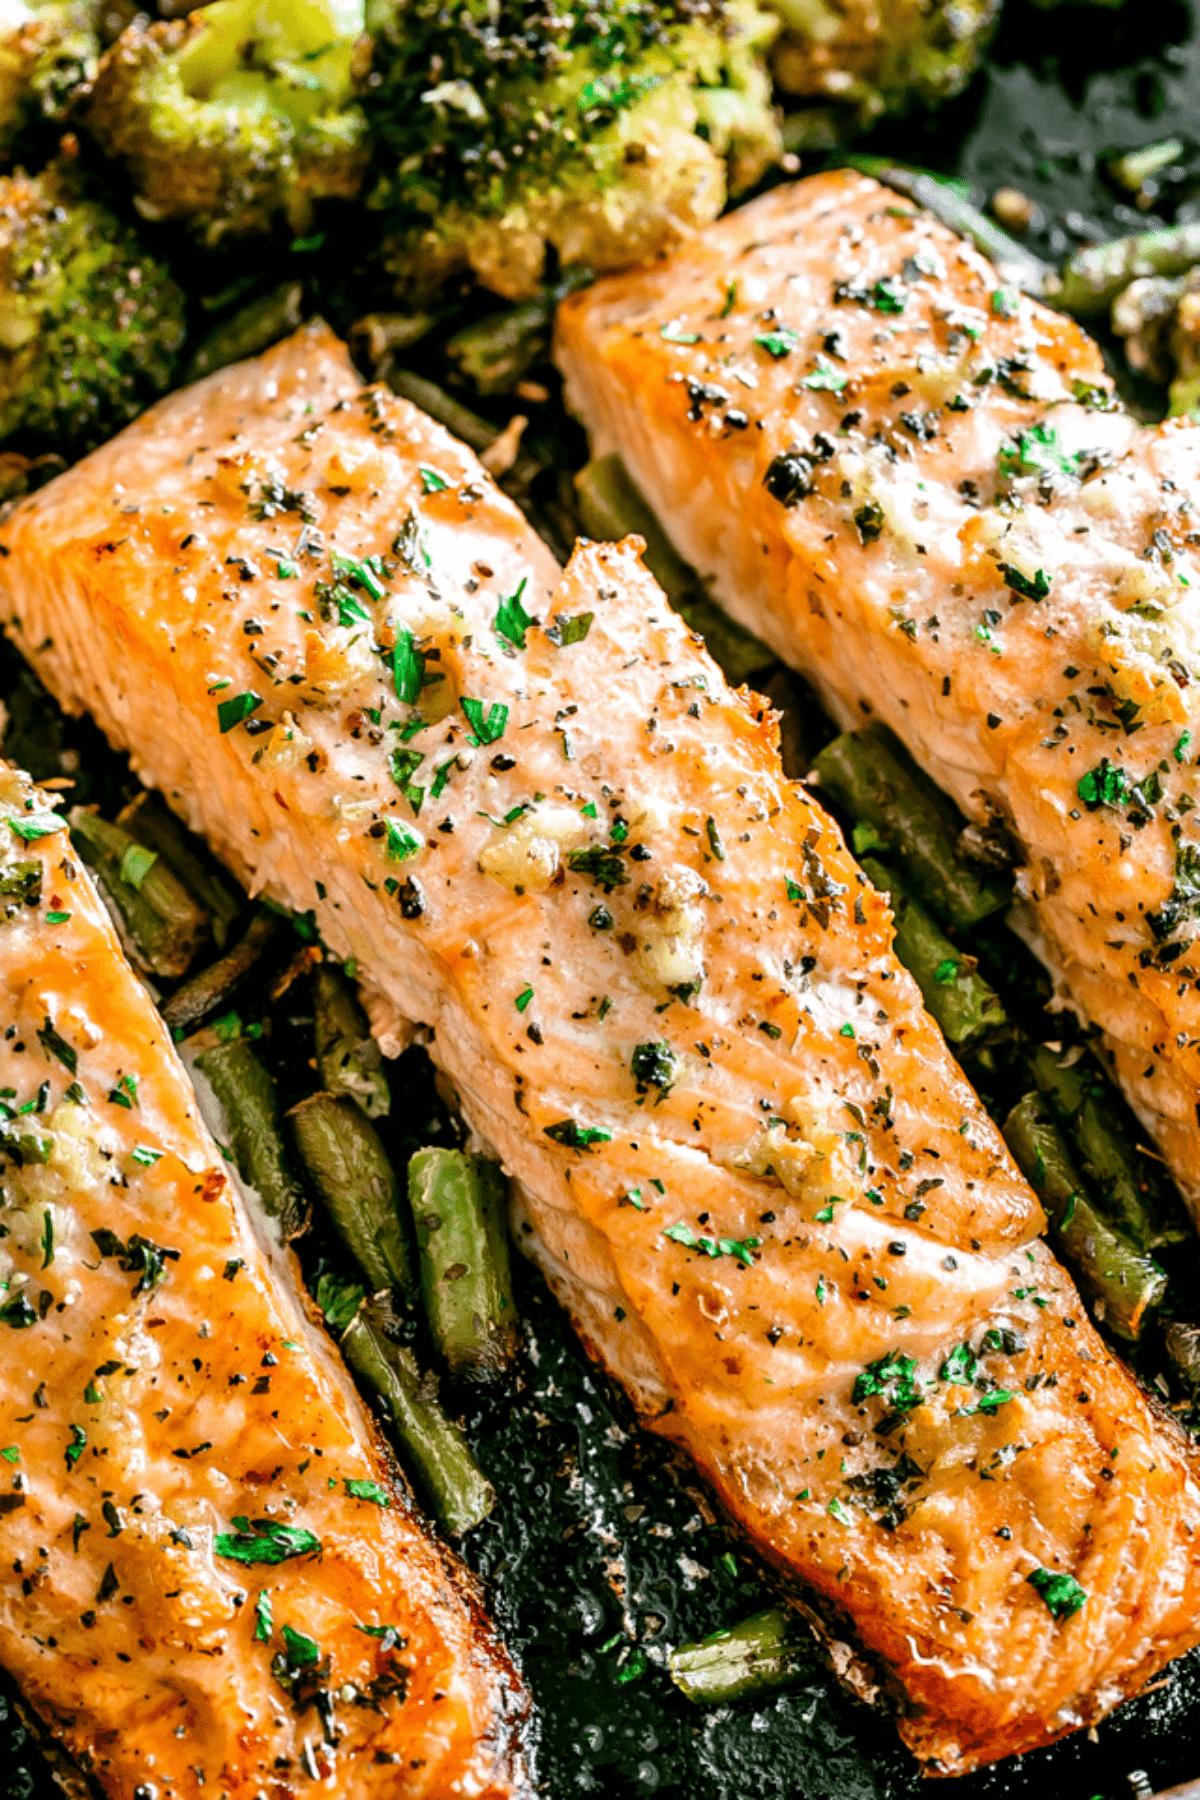 Aerial intake of three baked salmon fillets on a tray placed on top of green vegetables.